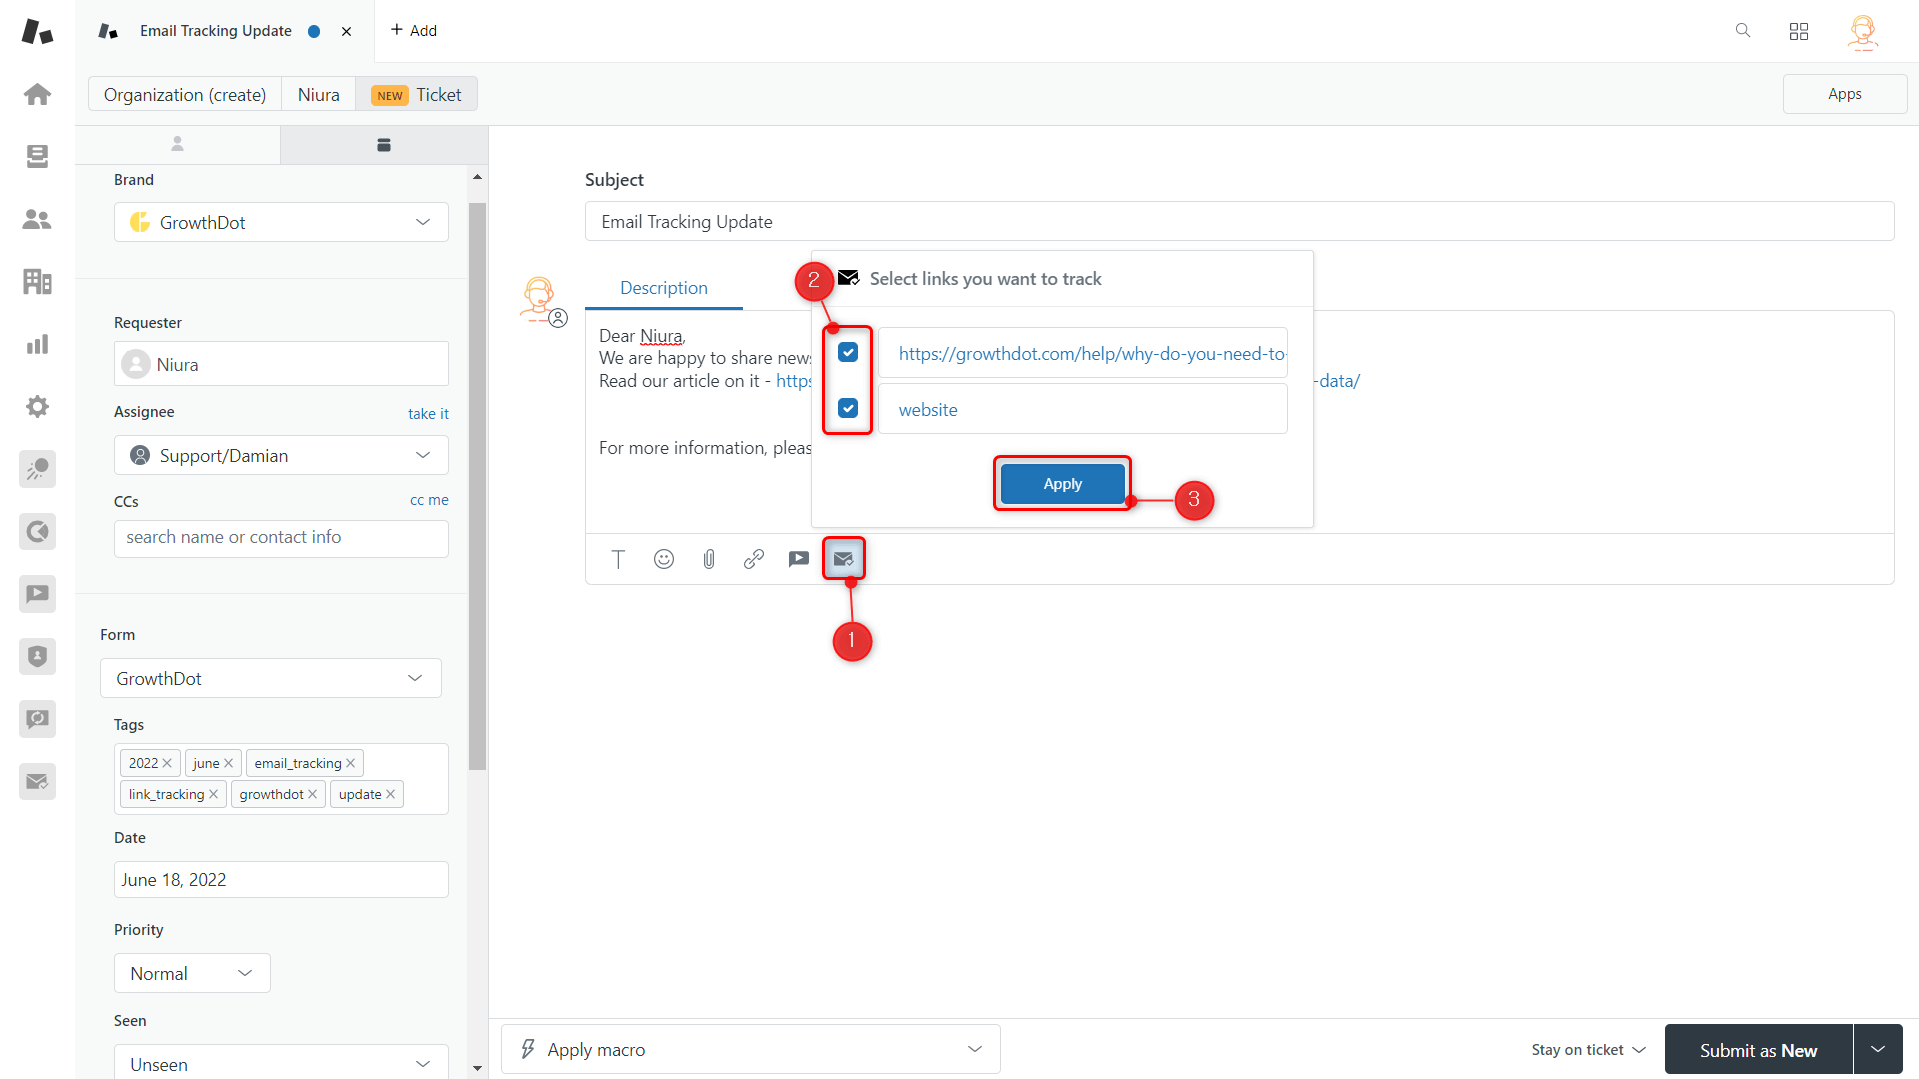 Create A Ticket With Links To Track